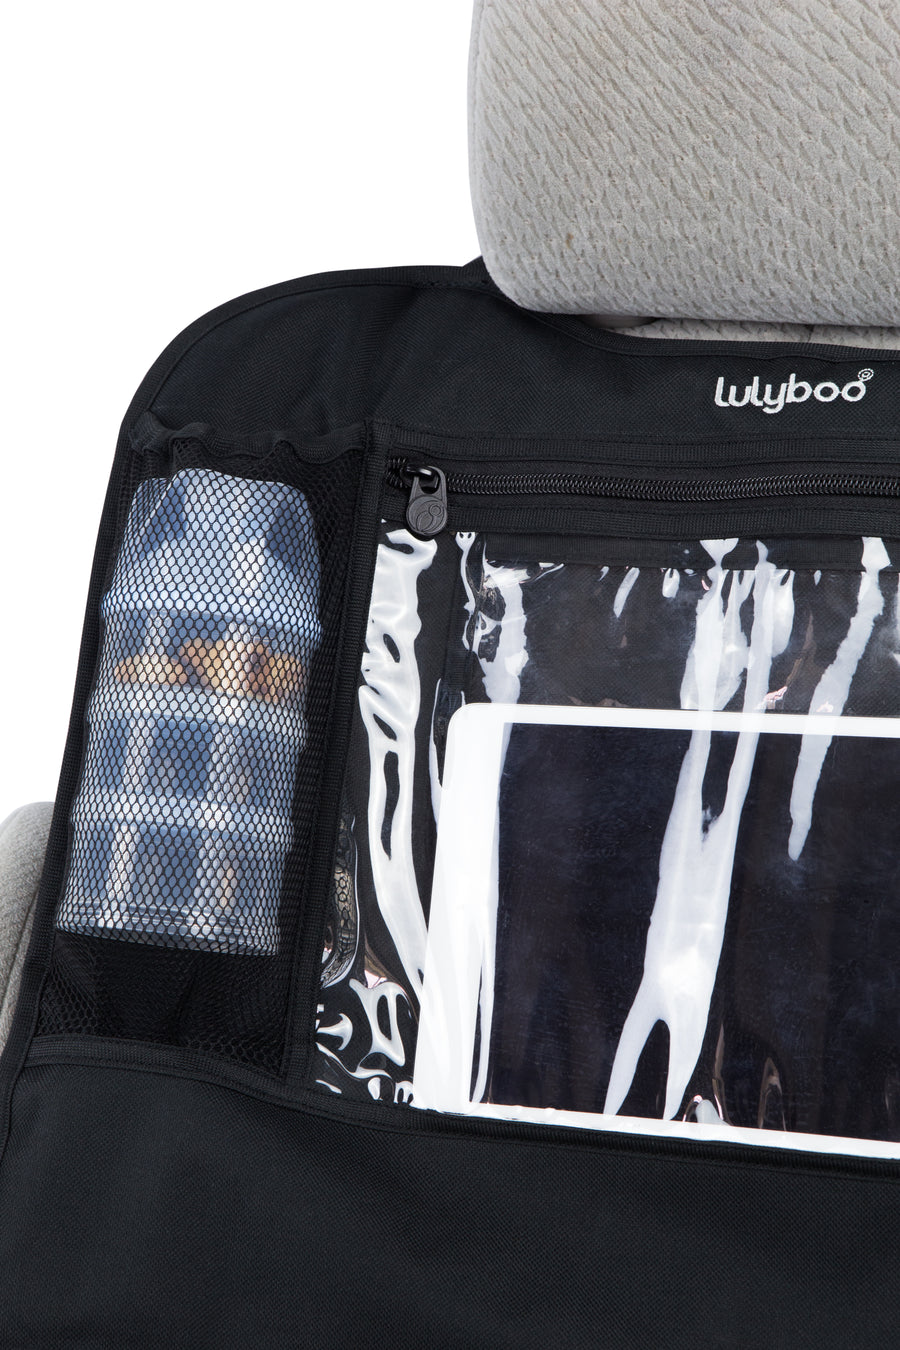 Lulyboo, Auto Seat Protector